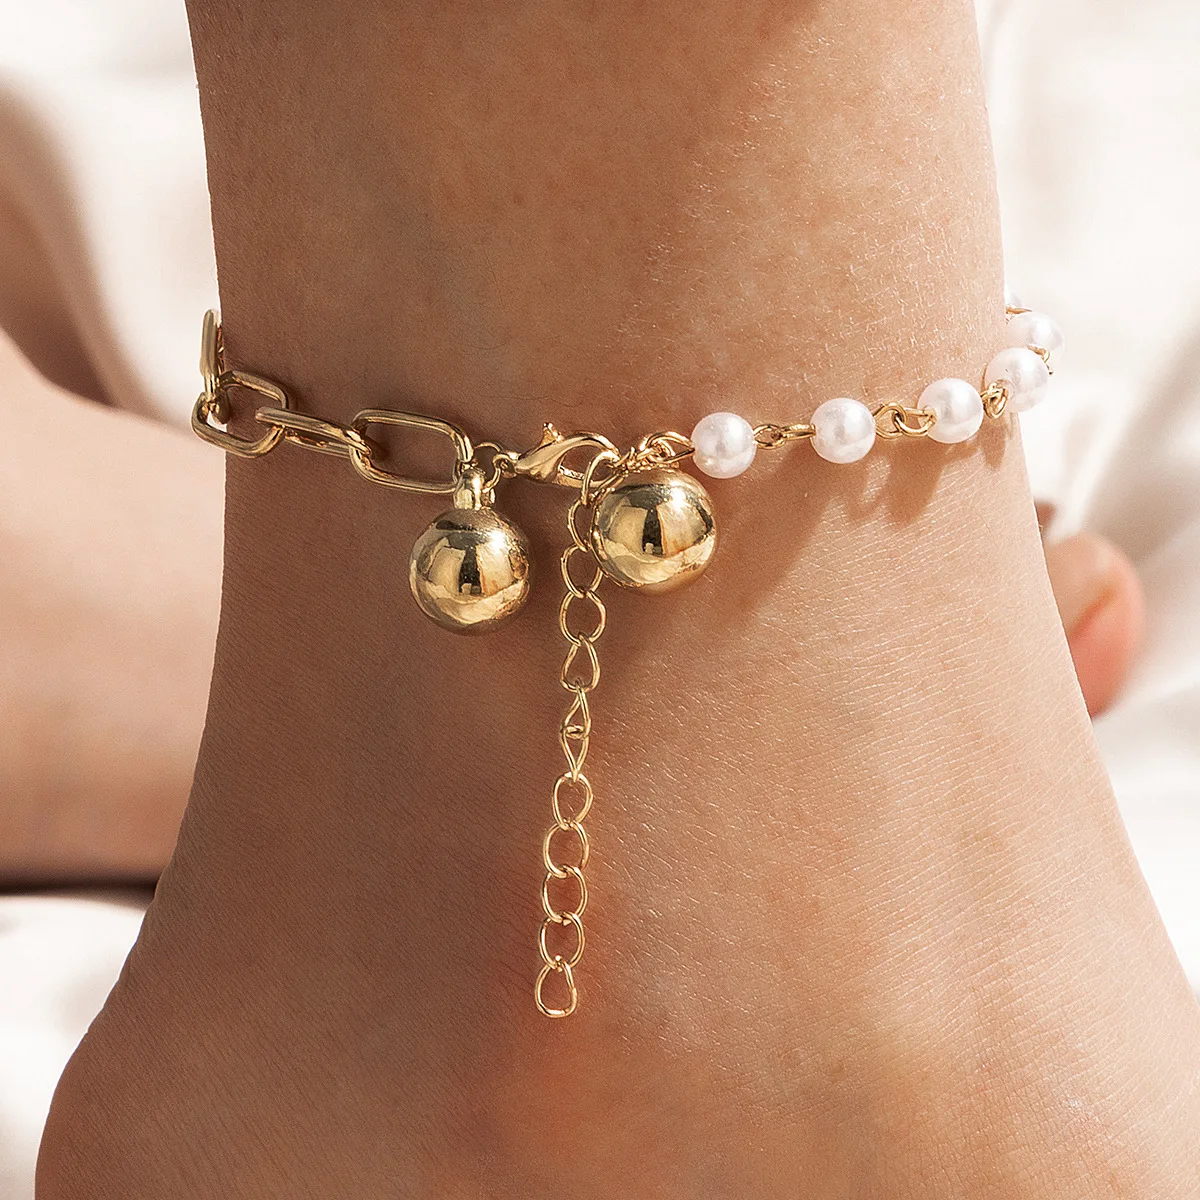 

Fashion Simple Bohemia Anklets Metal Bell Imitation Pearl Chain On Leg Anklets For Women Summer Beach Foot Jewelry Charm Anklet